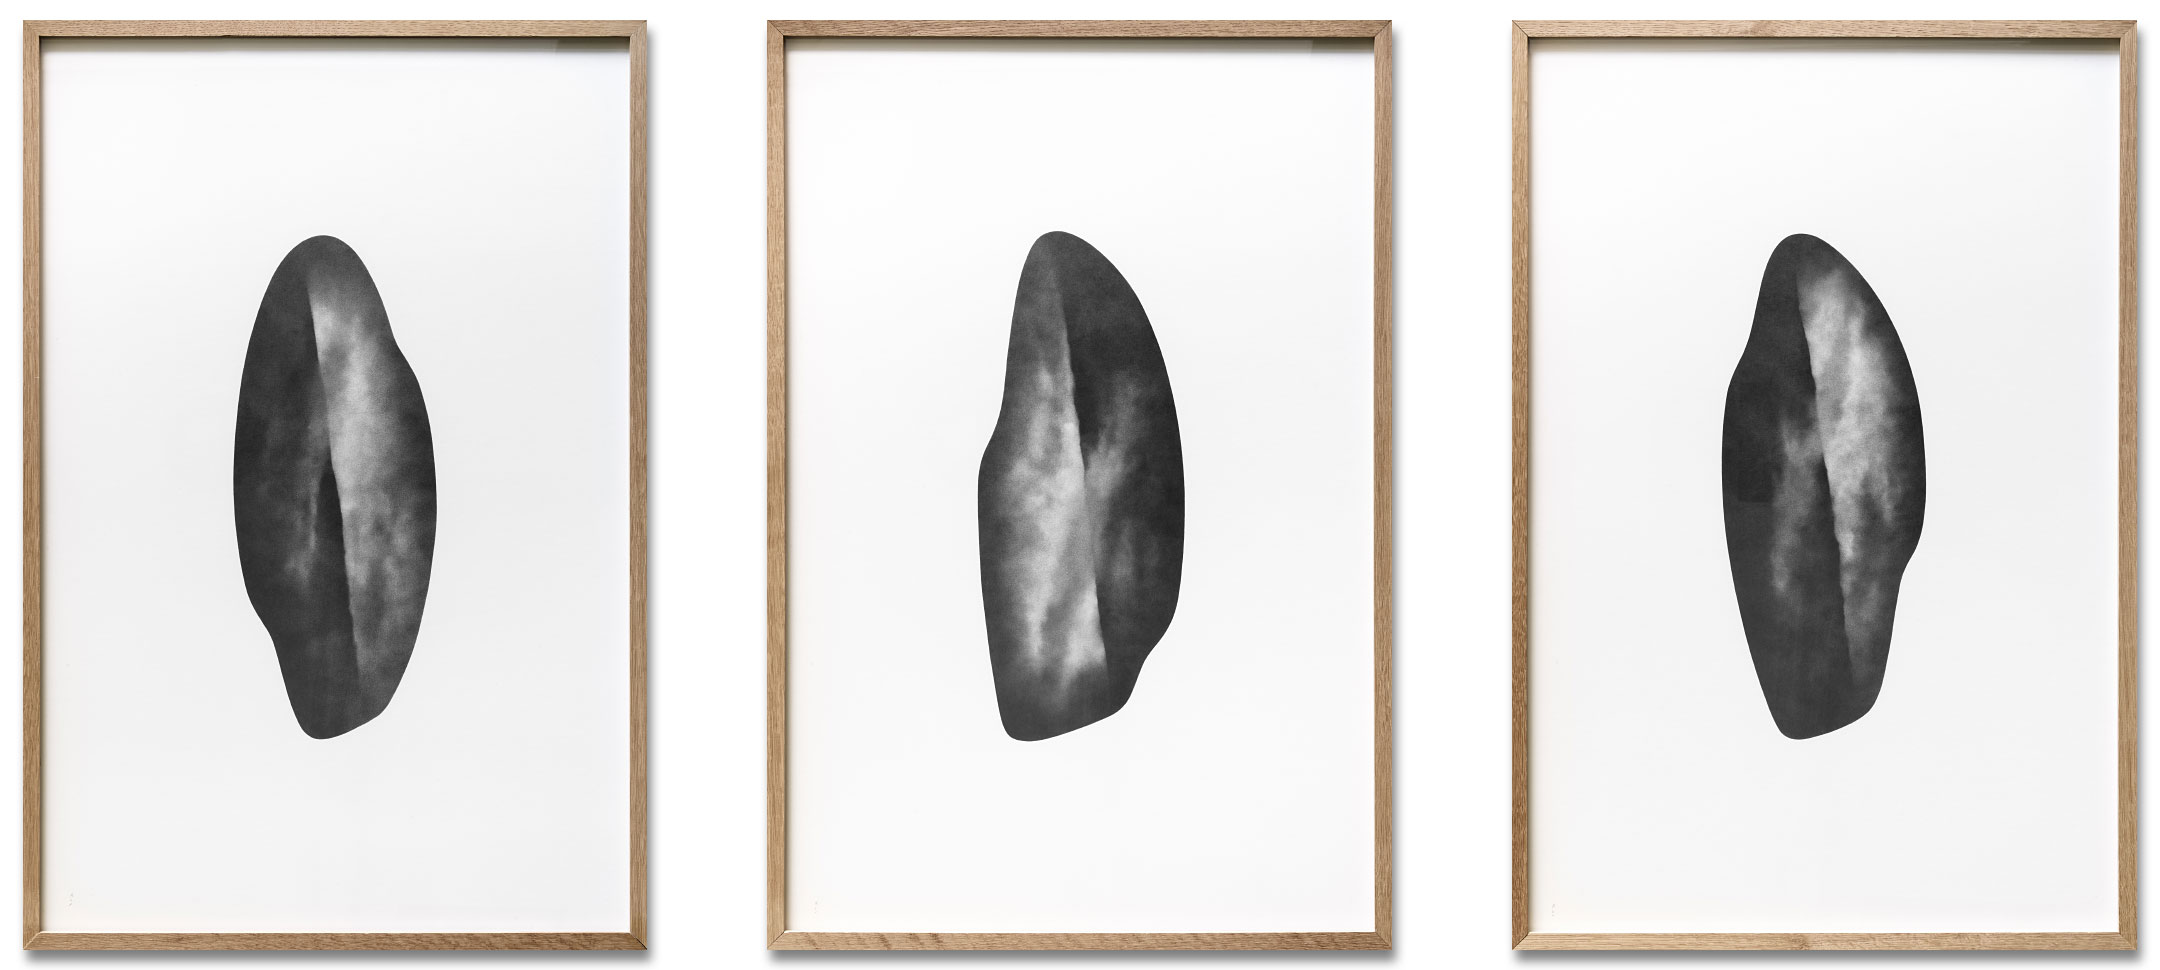 Open Drawing #119, #118, #117 / Graphite Pencil on Matboard / 60 x 90 cm / SOLD